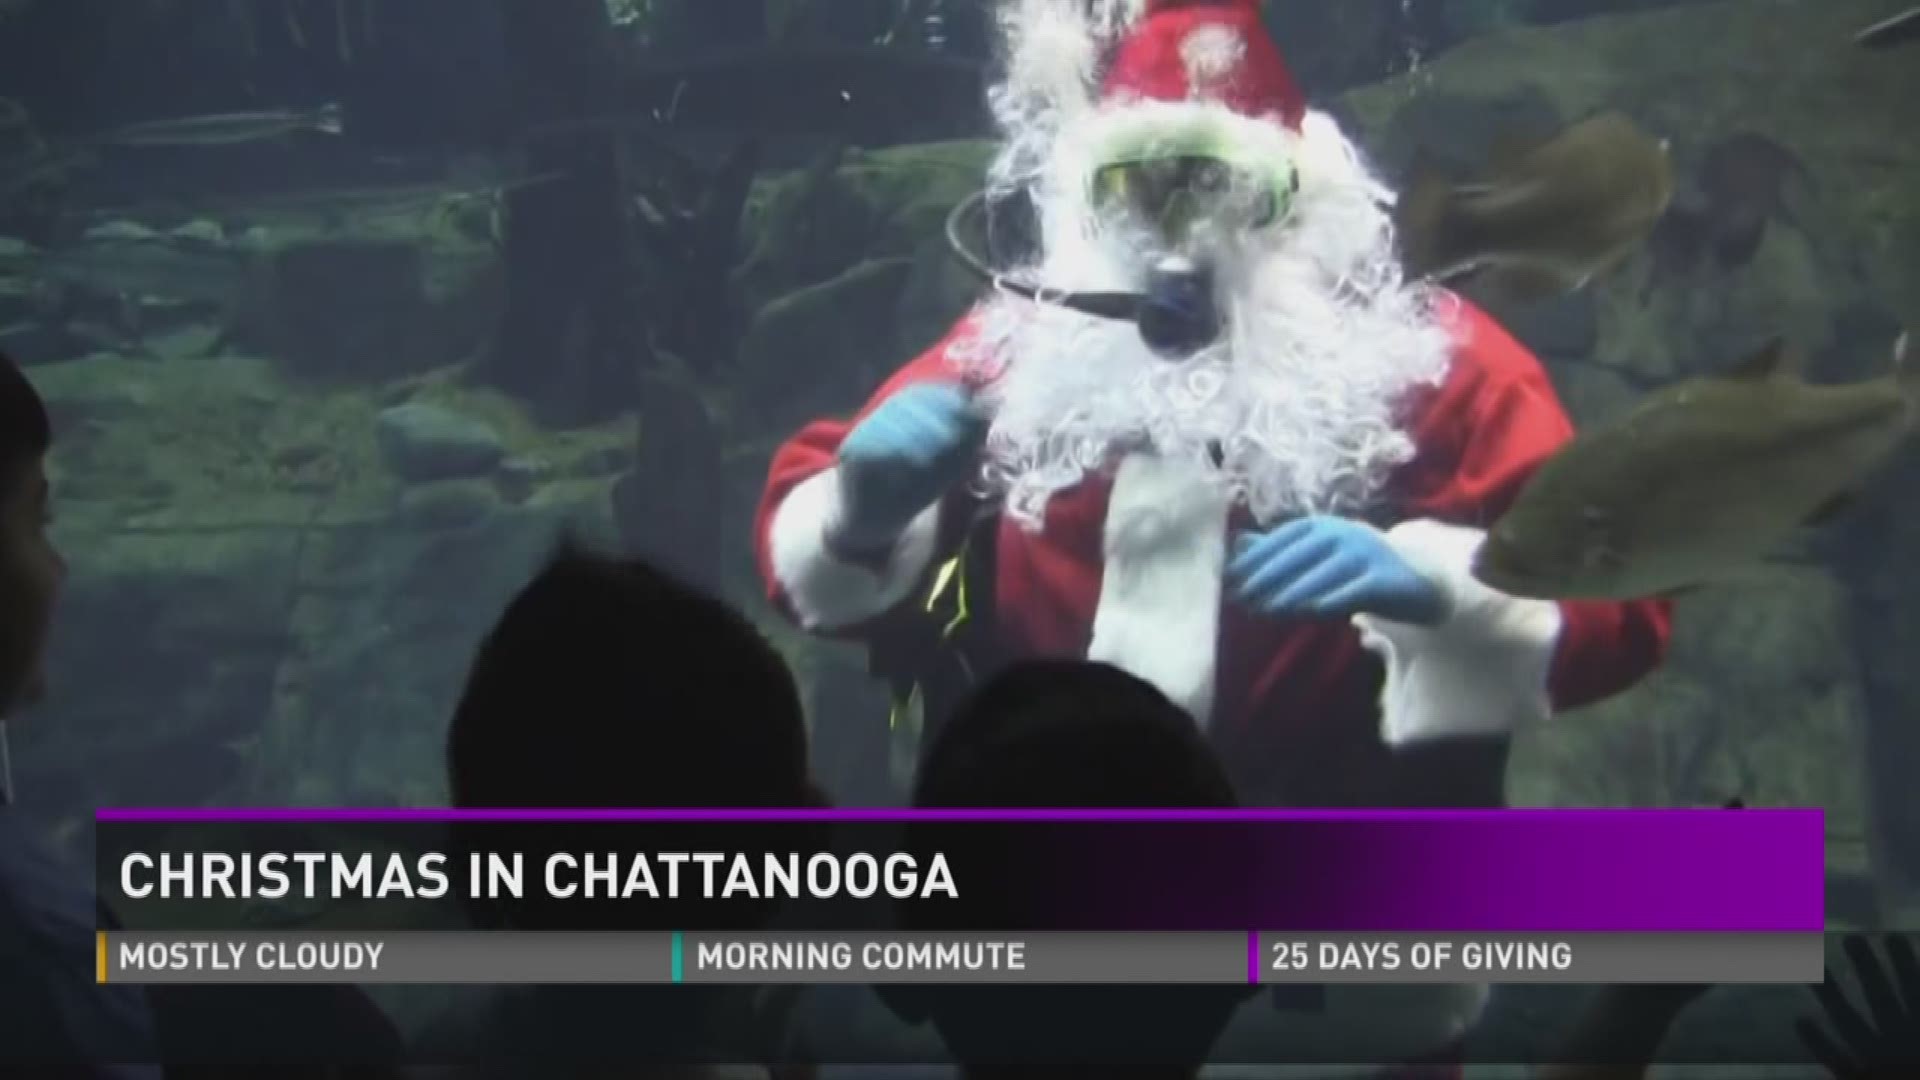 The Tennessee Aquarium is just one of many Chattanooga attractions with special  holiday events planned this year. (12/18/15 6AM)